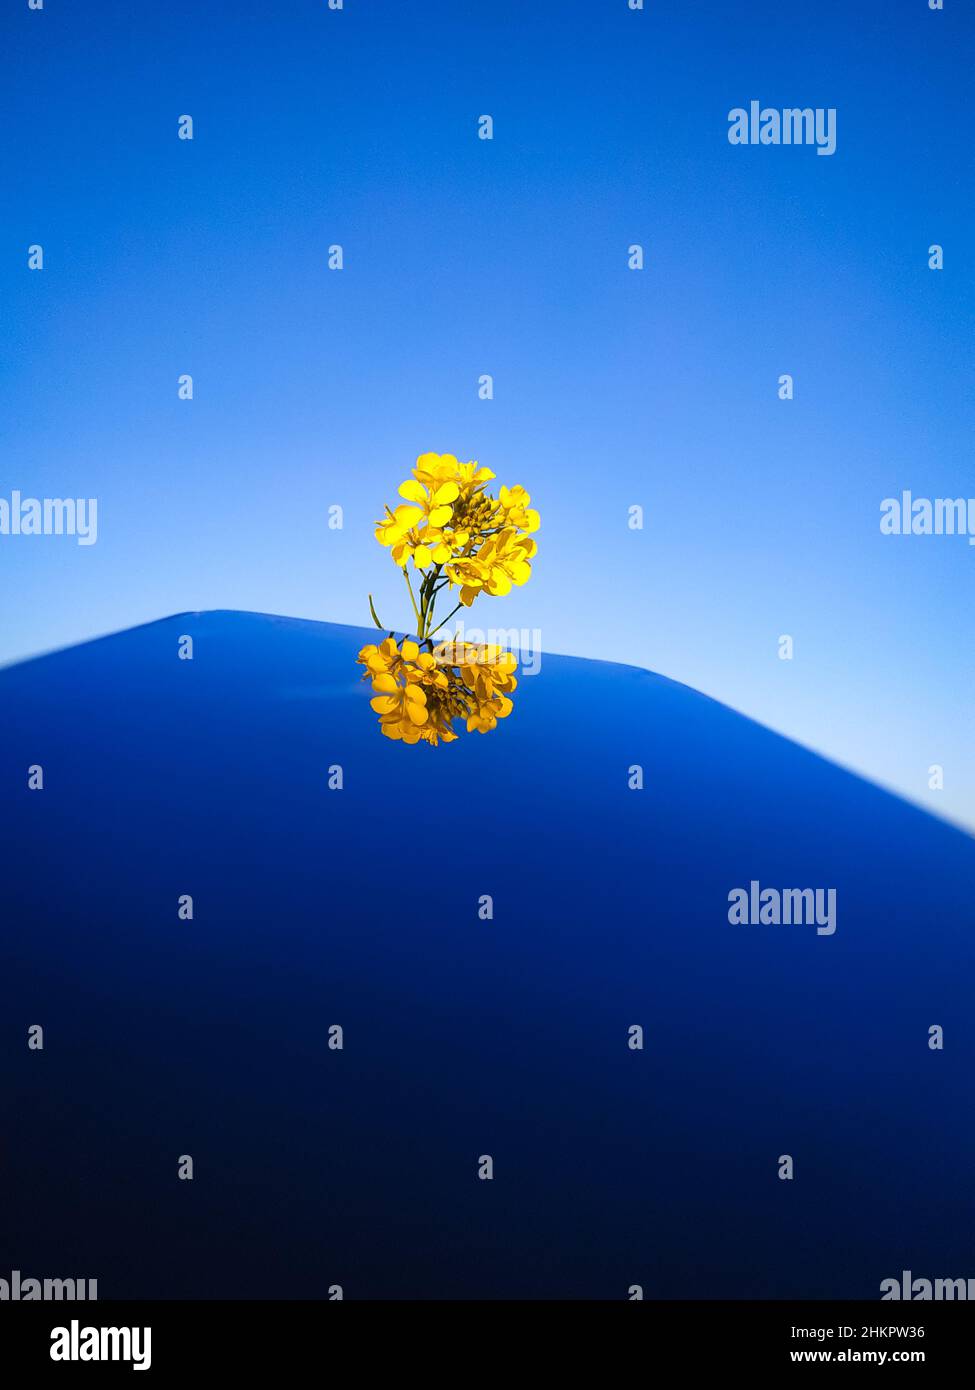 A beautiful yellow mustard flower on blue sky with reflection Stock Photo